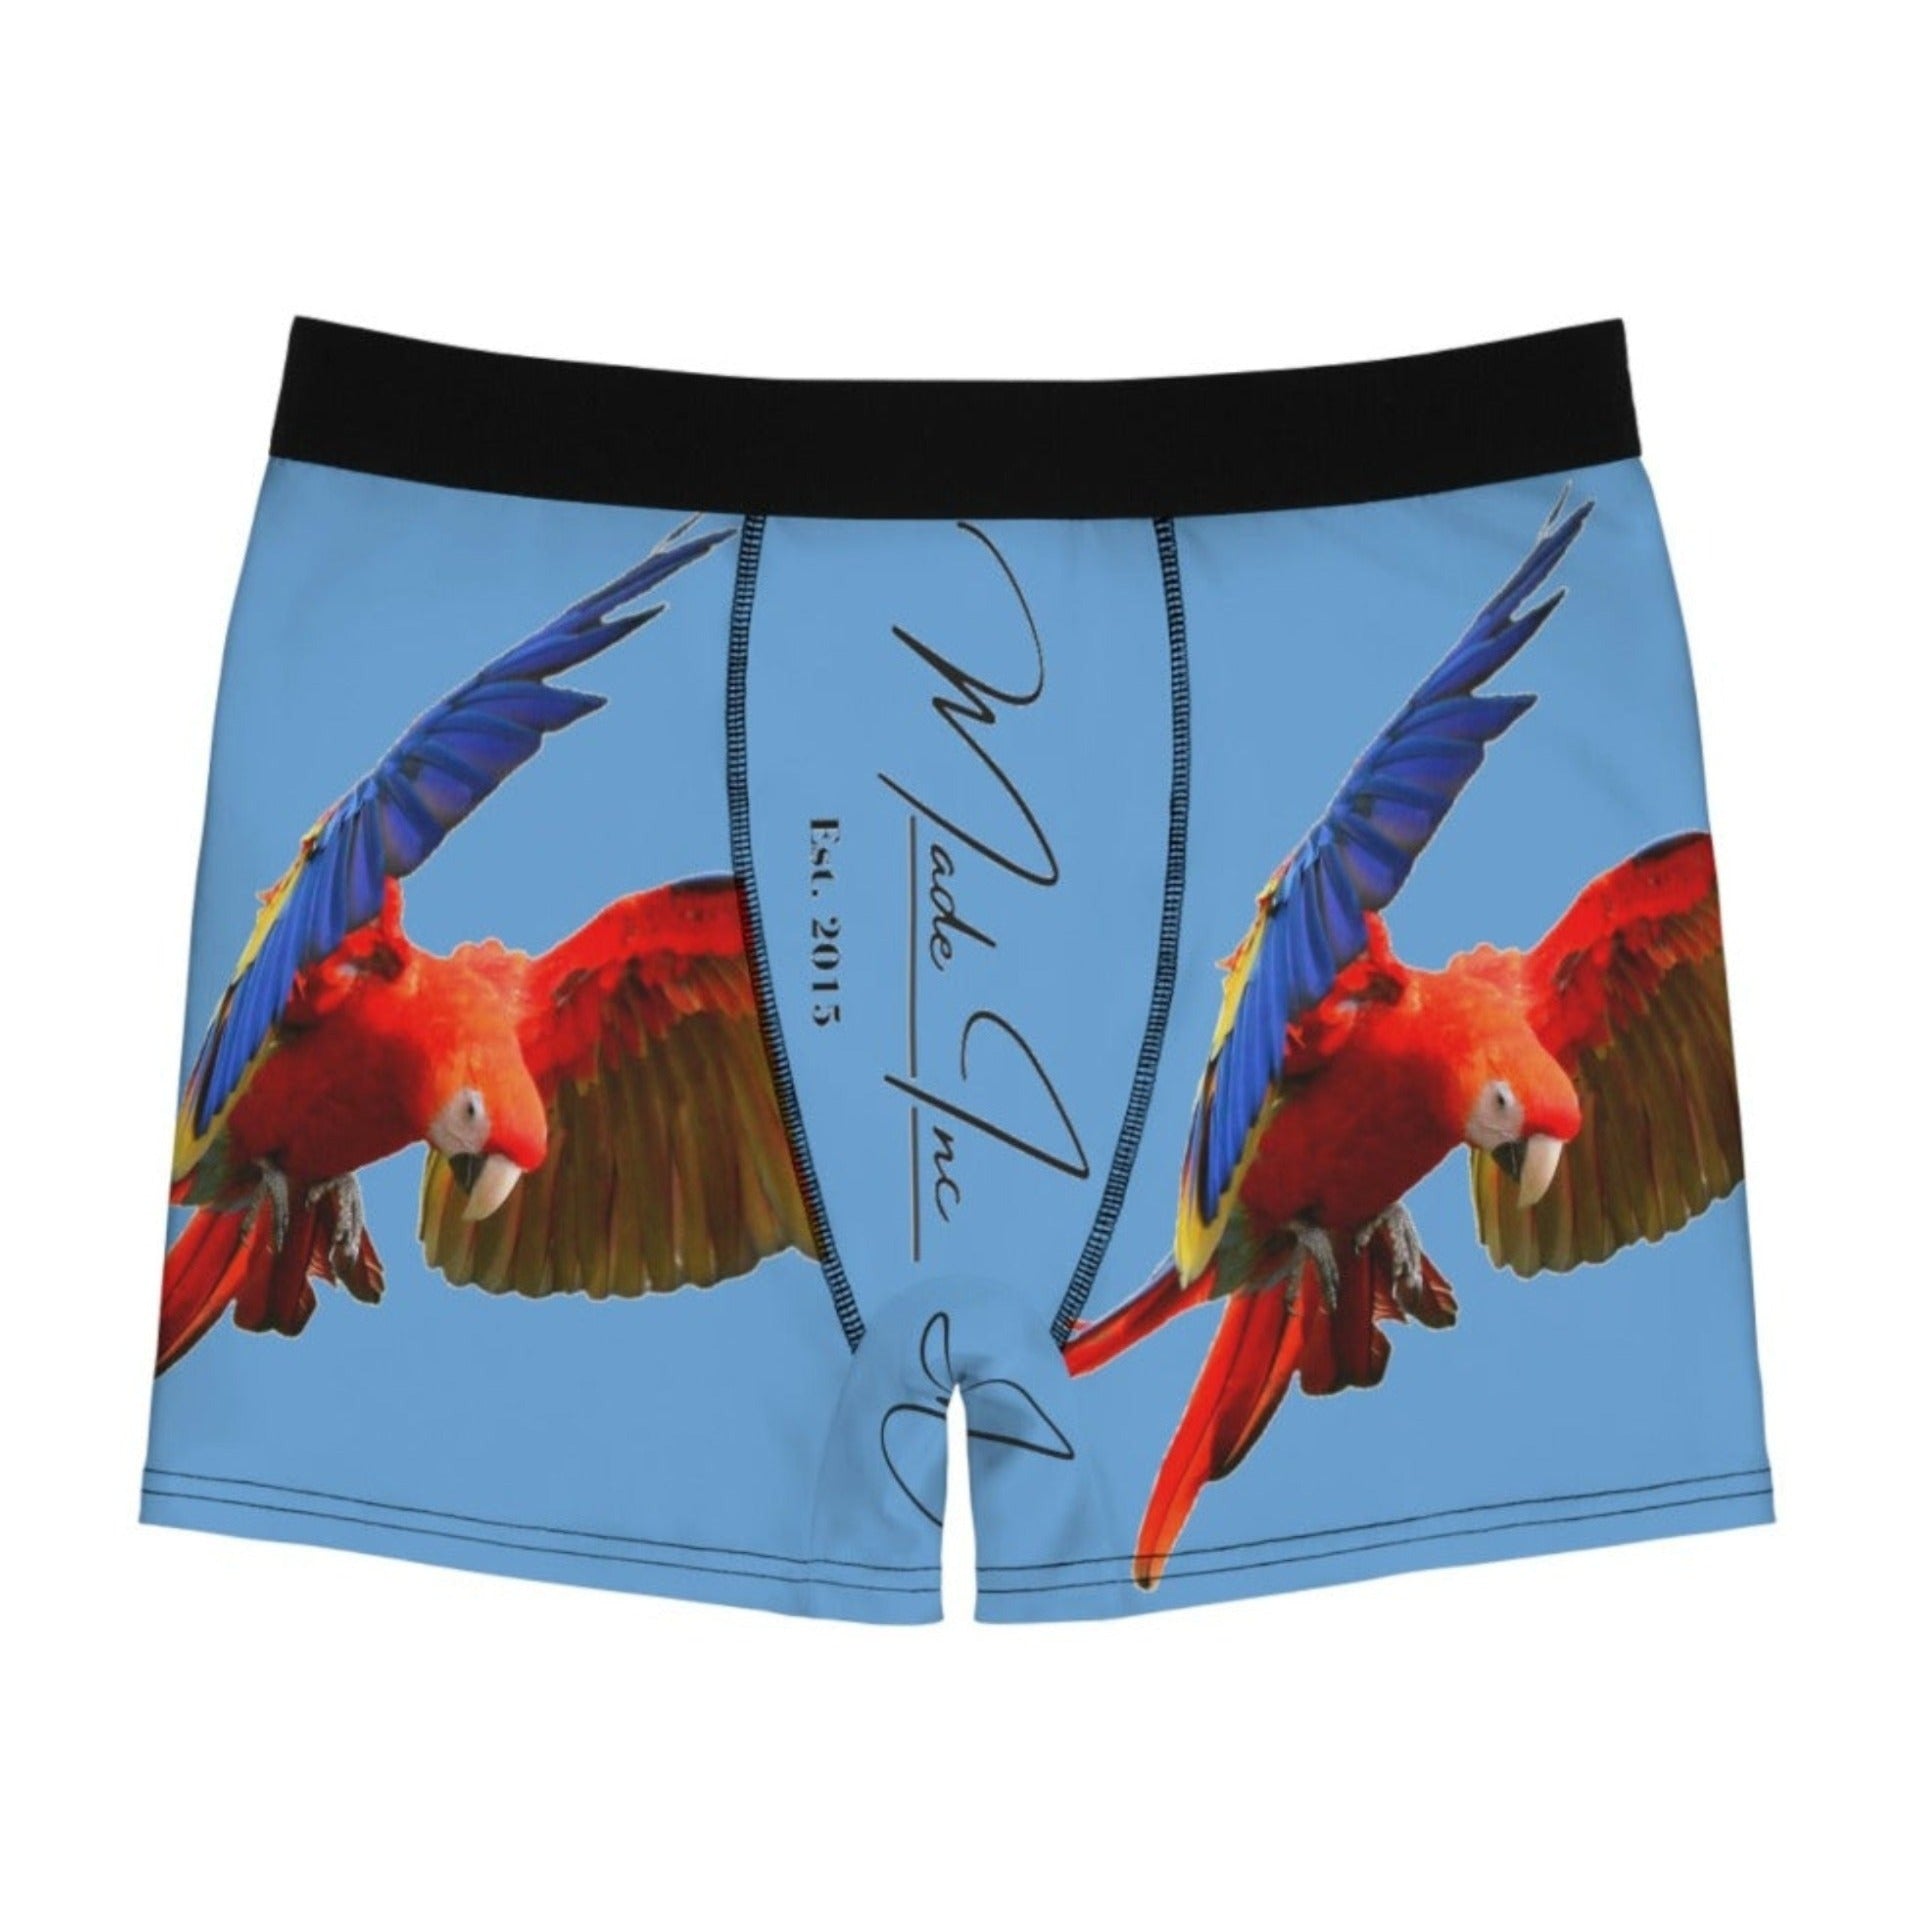 Image of luxury Scarlet Macaw Custom Men's Boxer Briefs by Made Inc, made from lightweight polyester fabric. Designed for comfort and style, perfect for everyday wear.